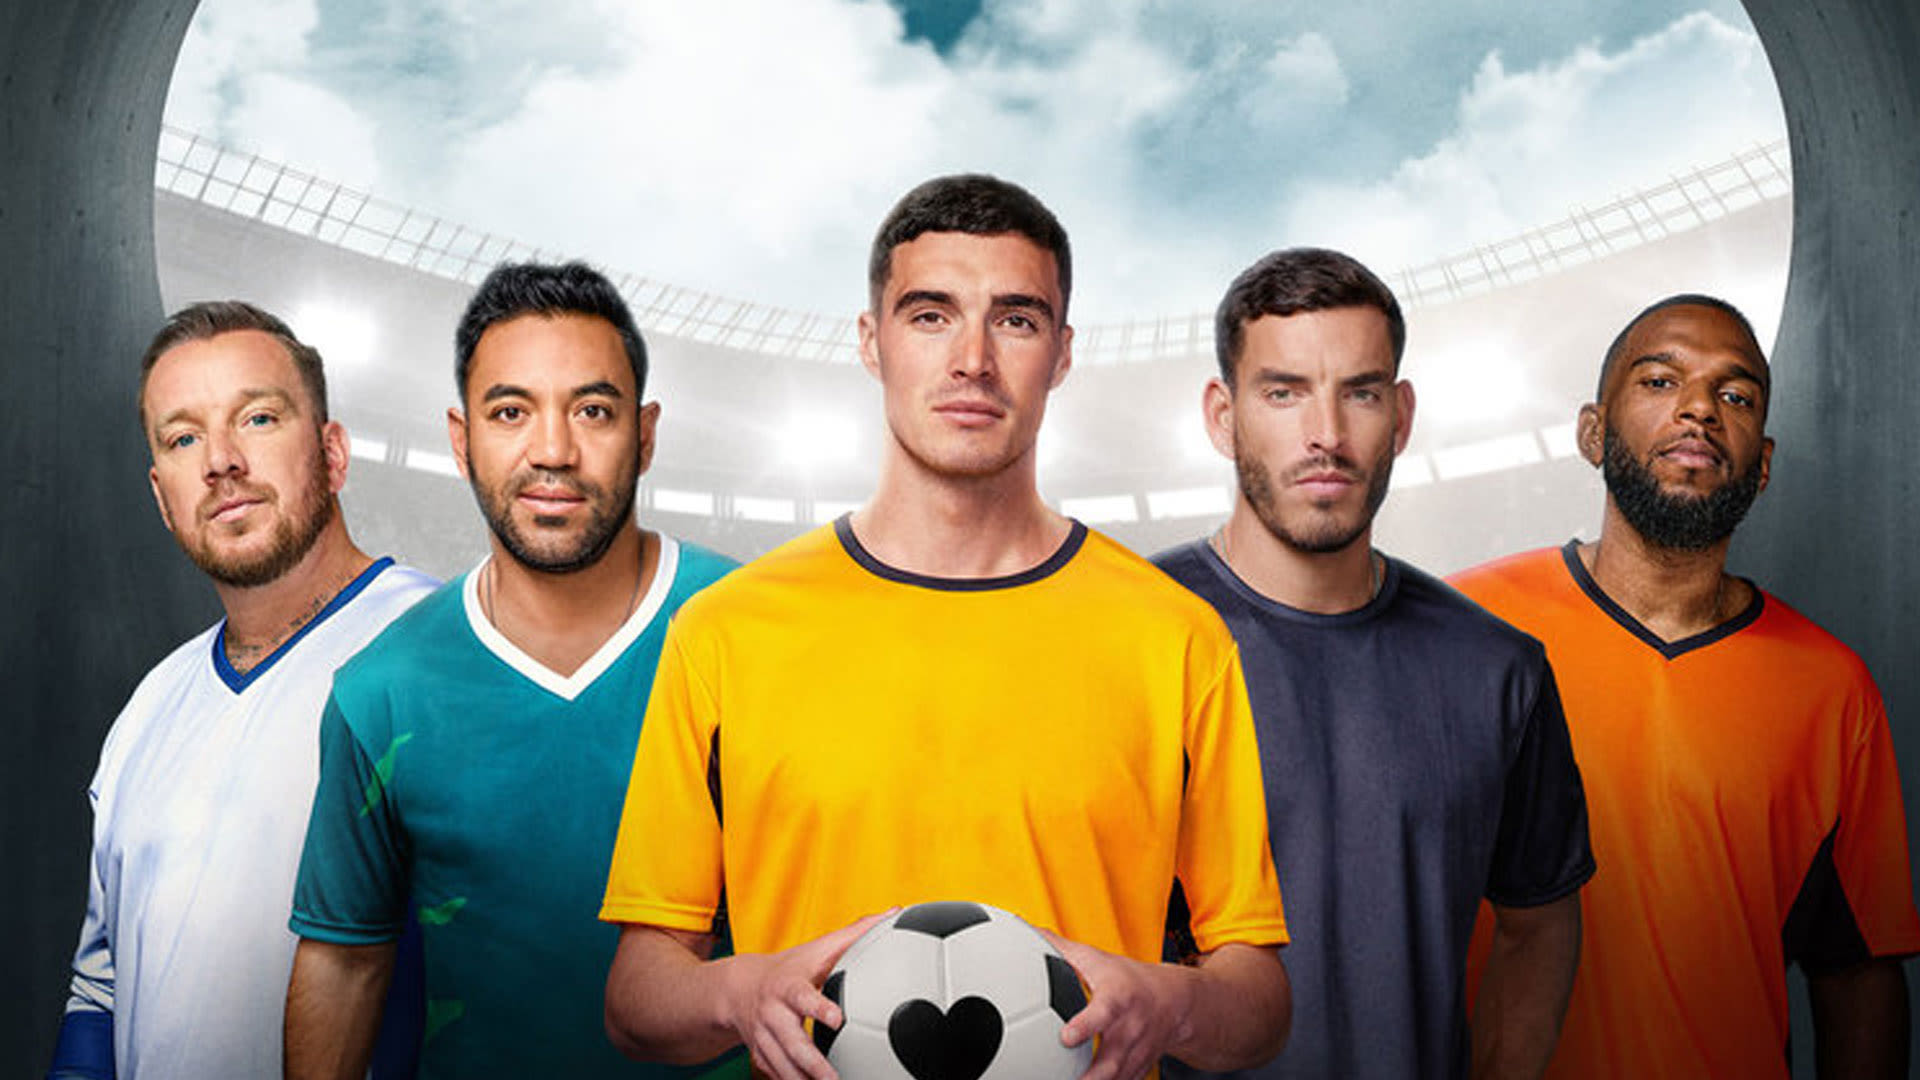 Meet the cast of Peacock's Love Undercover, five soccer stars looking for love